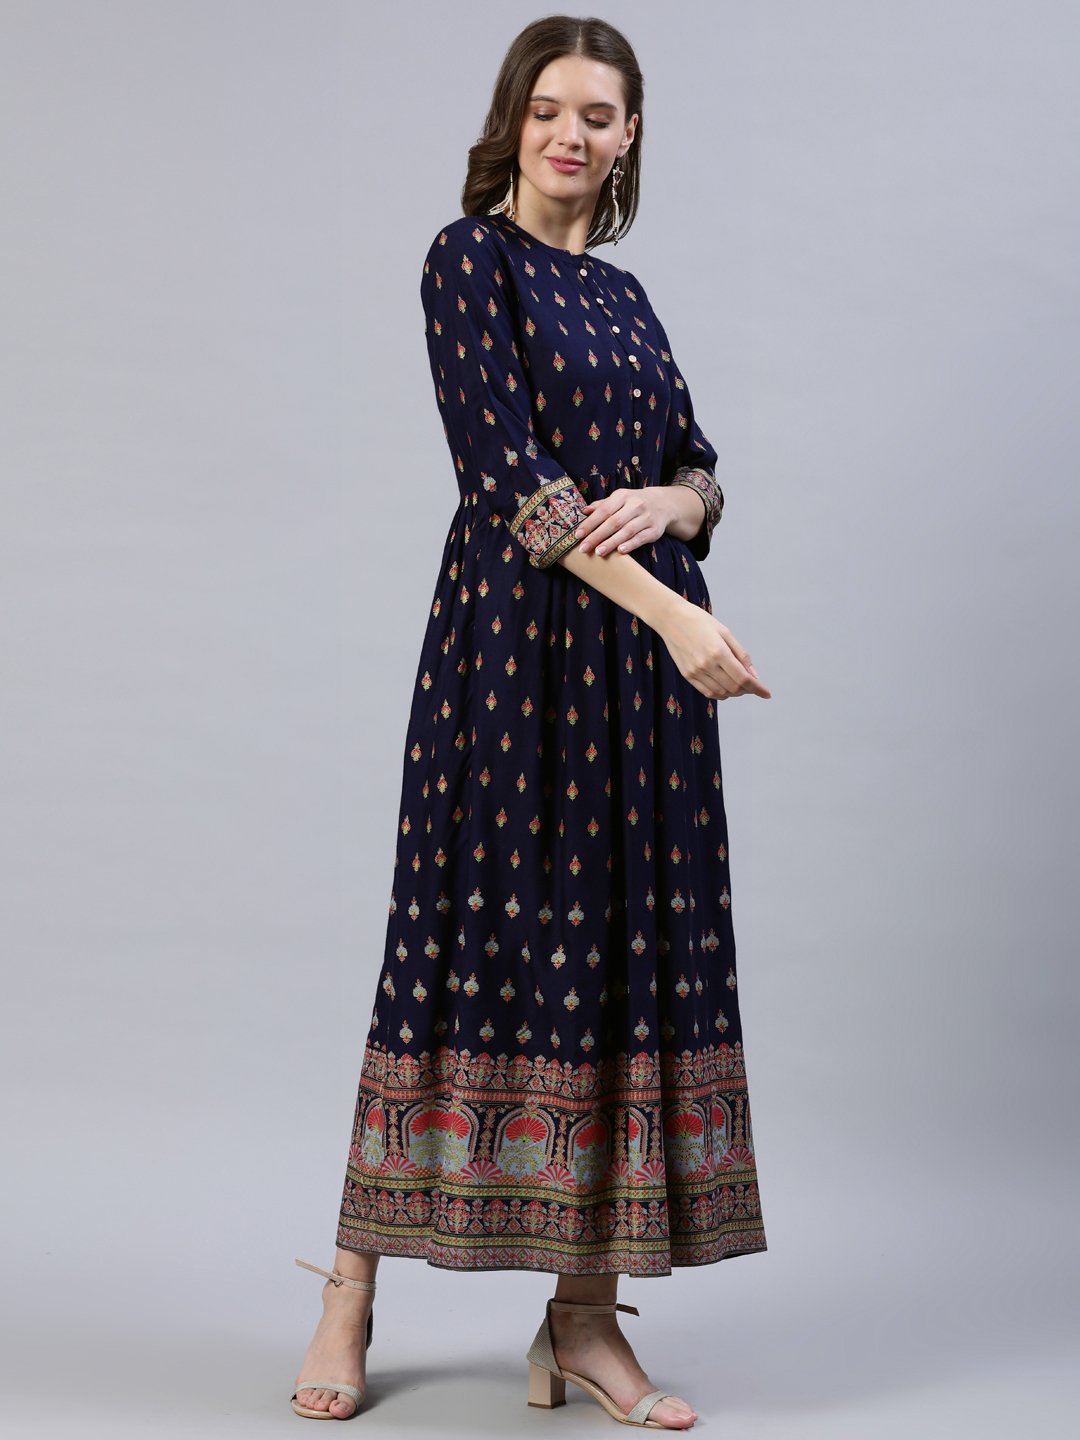 Women's Navy Blue Printed Dress With Three Quarter Sleeves - Nayo Clothing